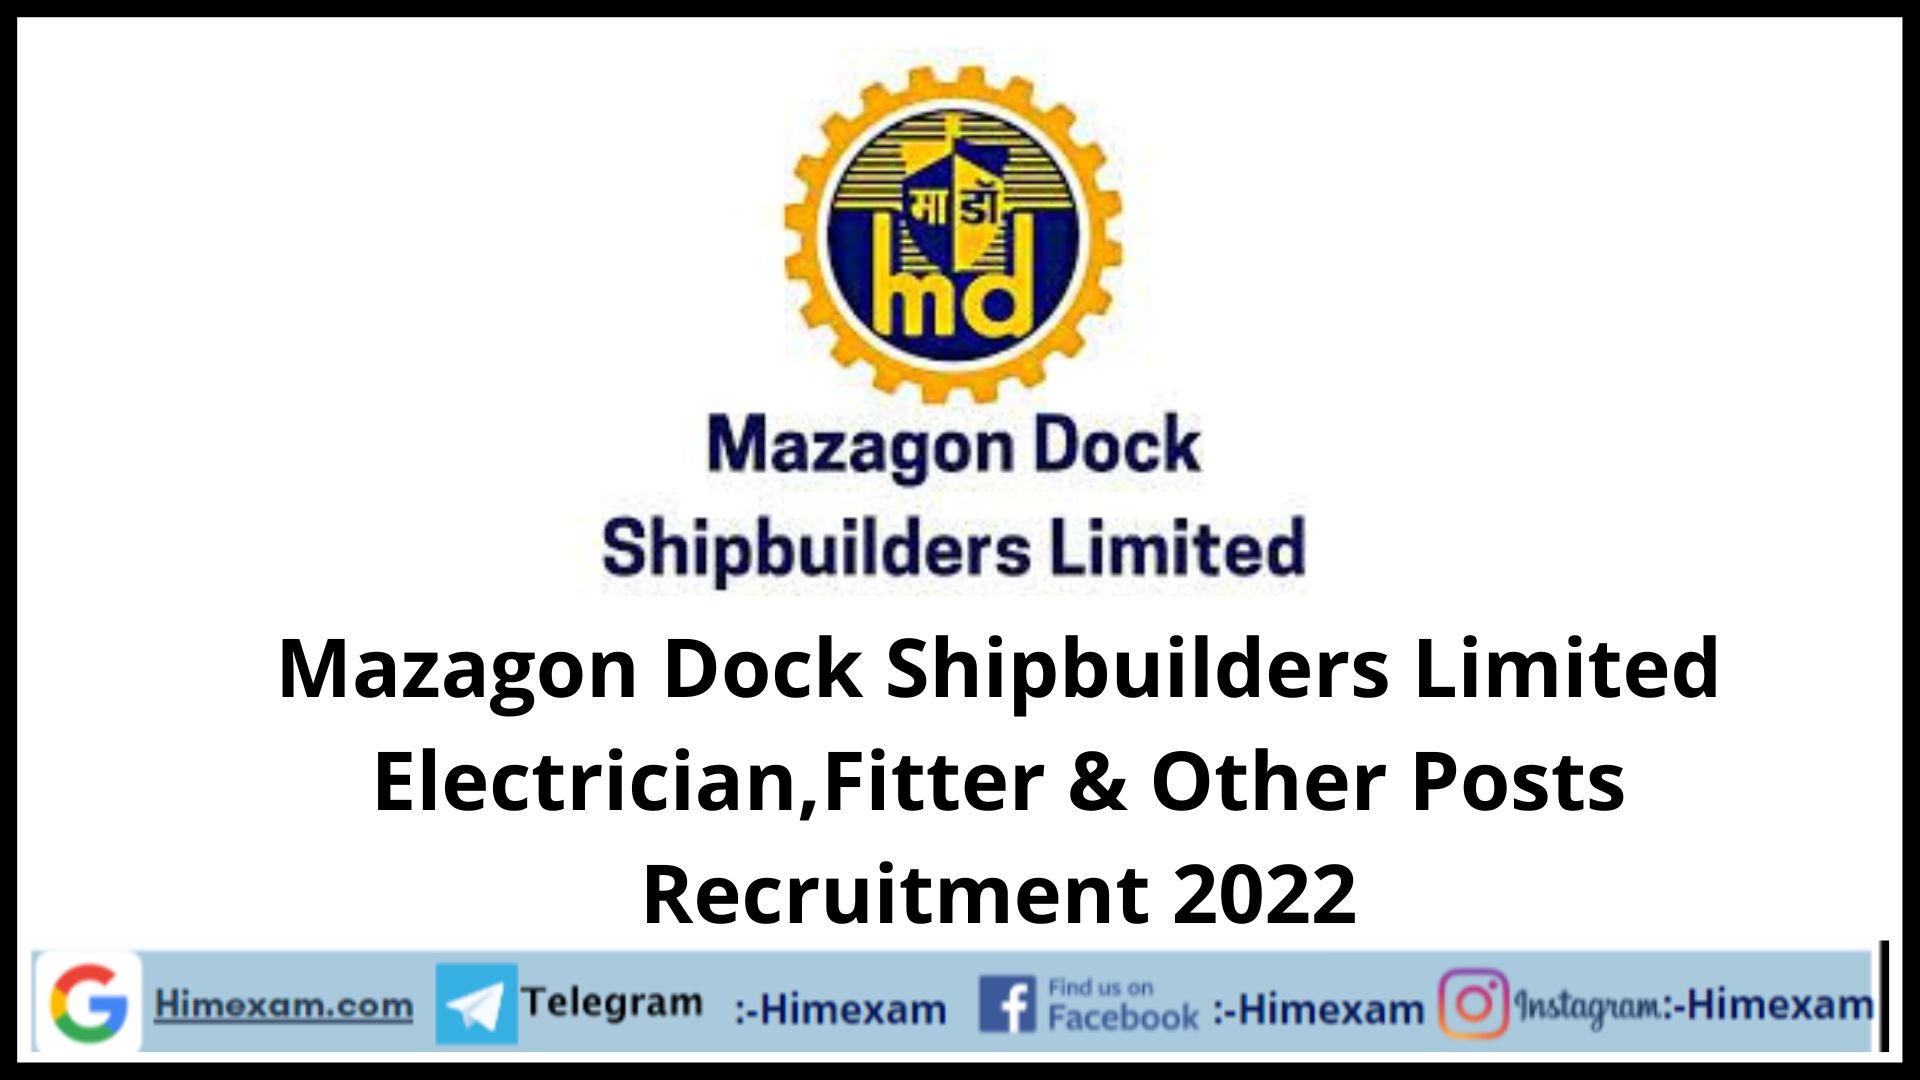 Mazagon Dock Shipbuilders Limited  Electrician,Fitter & Other Posts Recruitment 2022